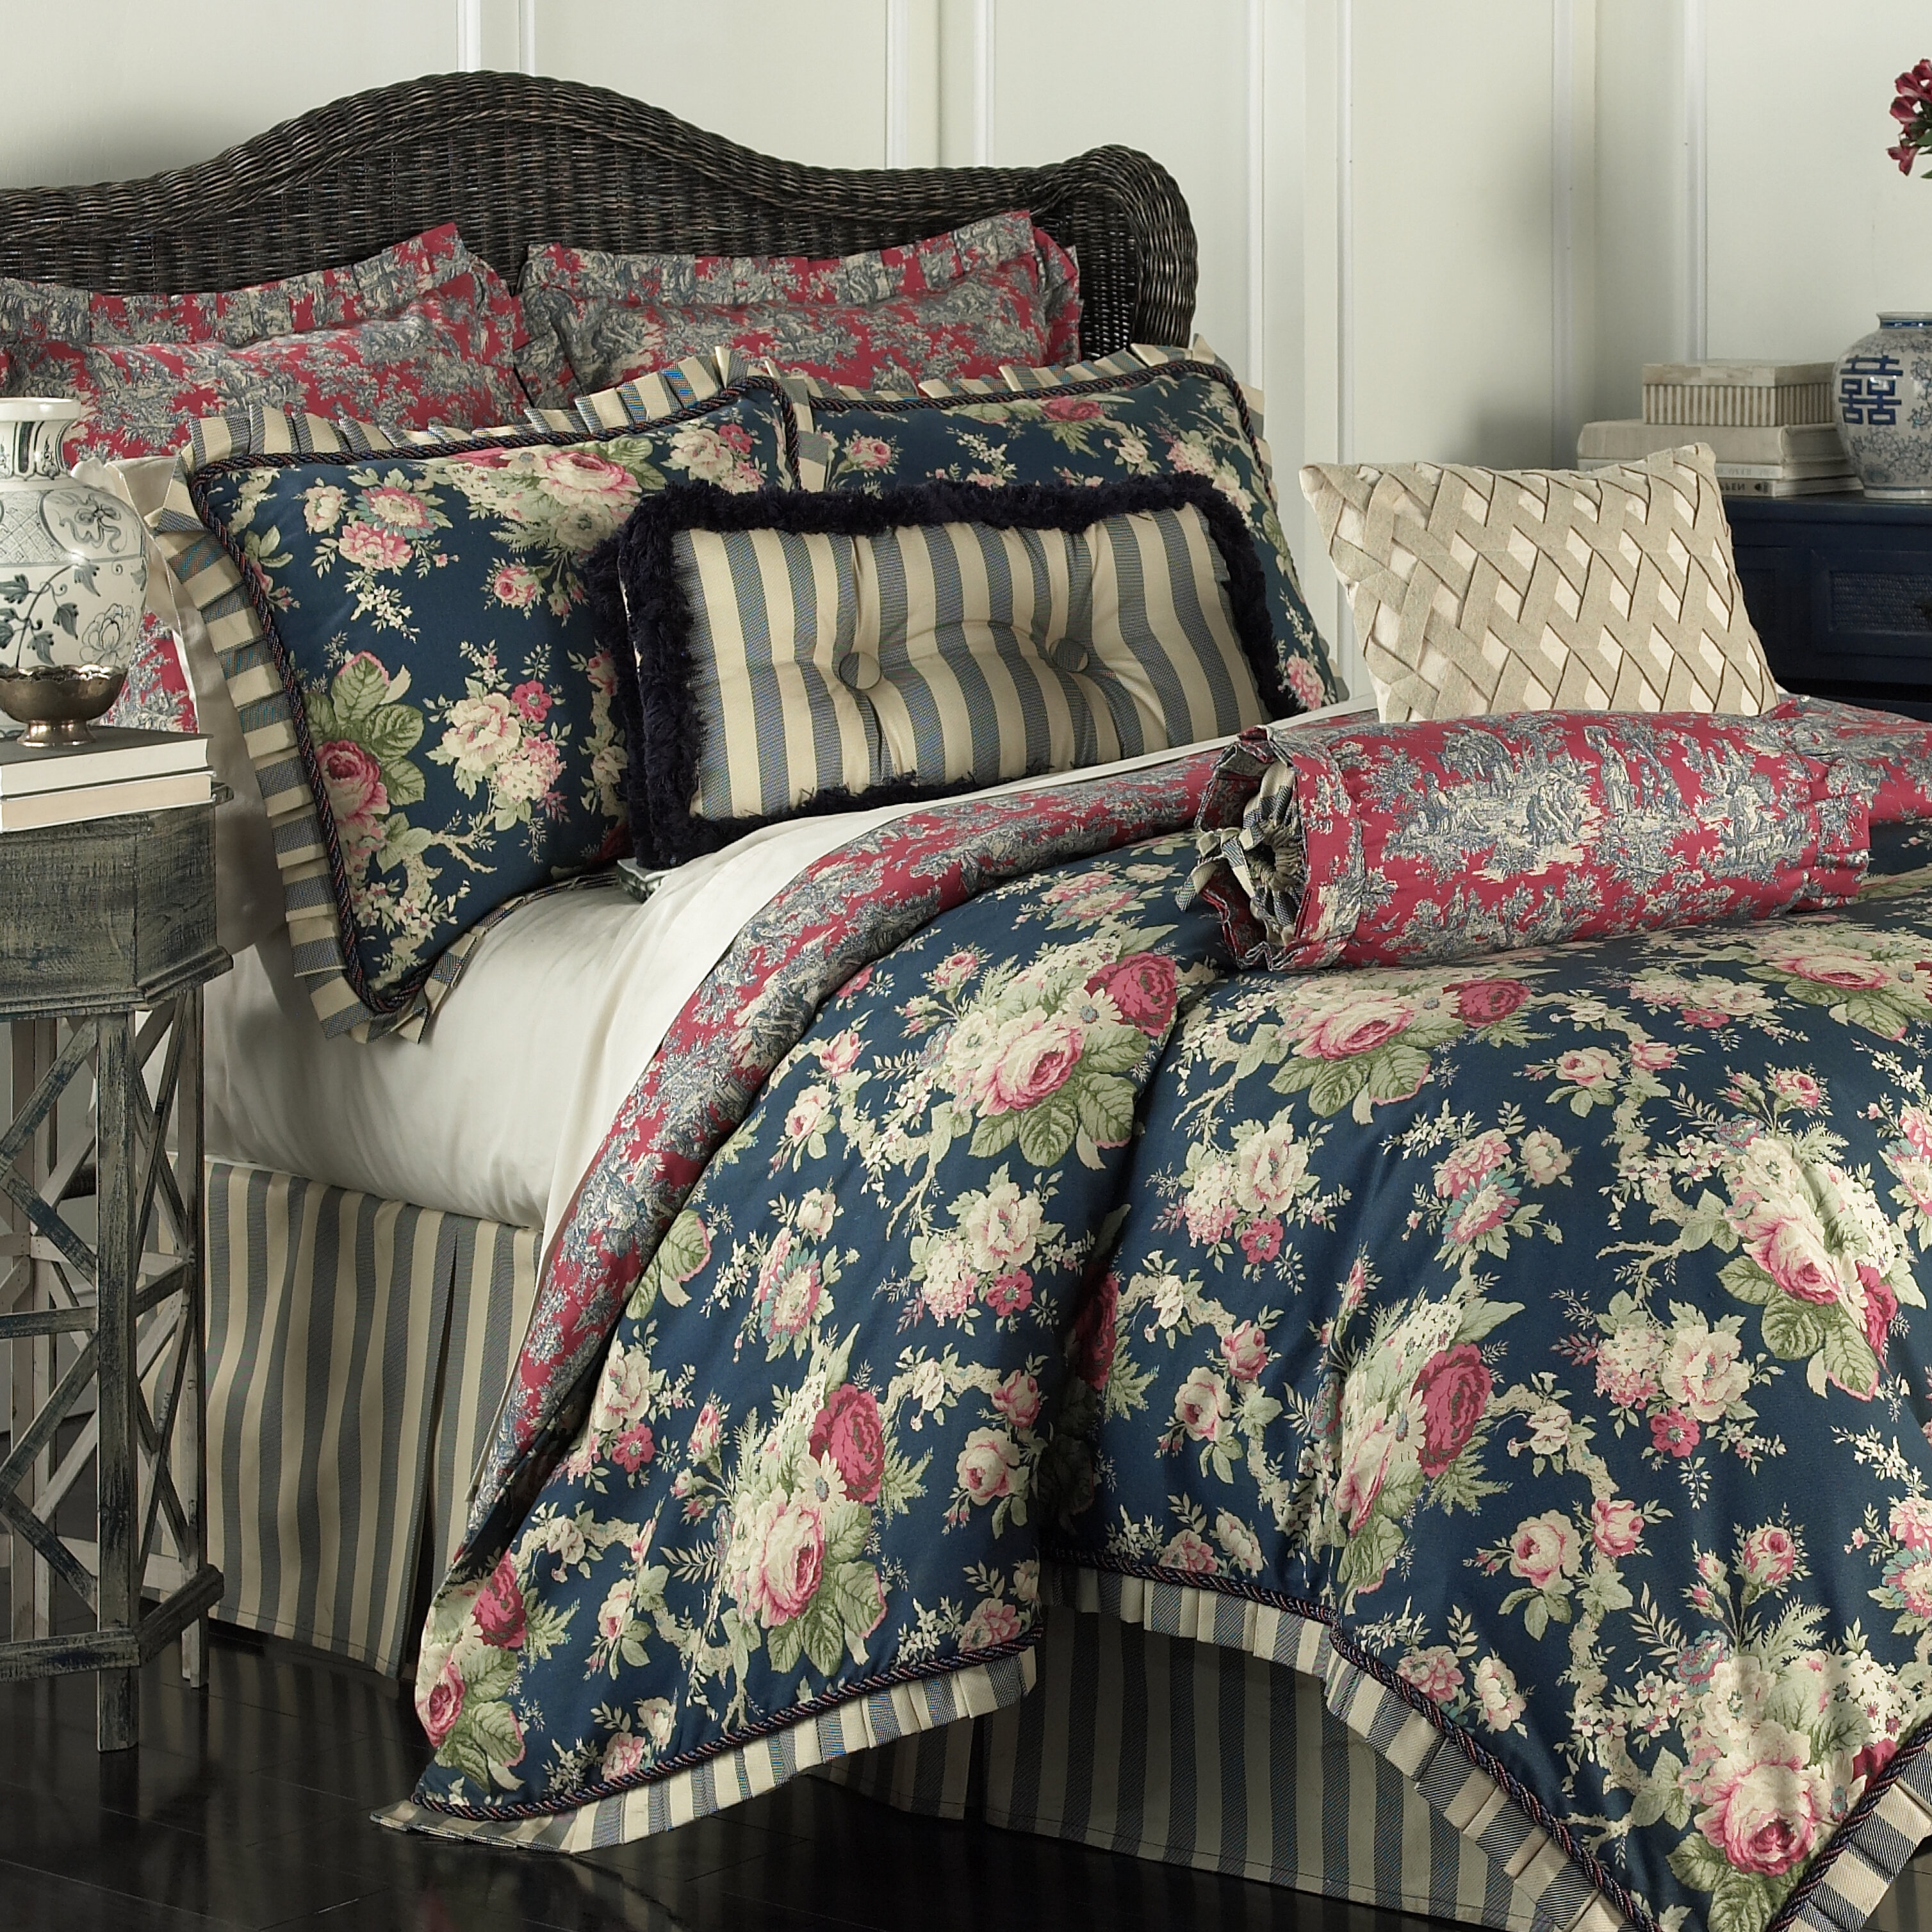 waverly toile bedding sets